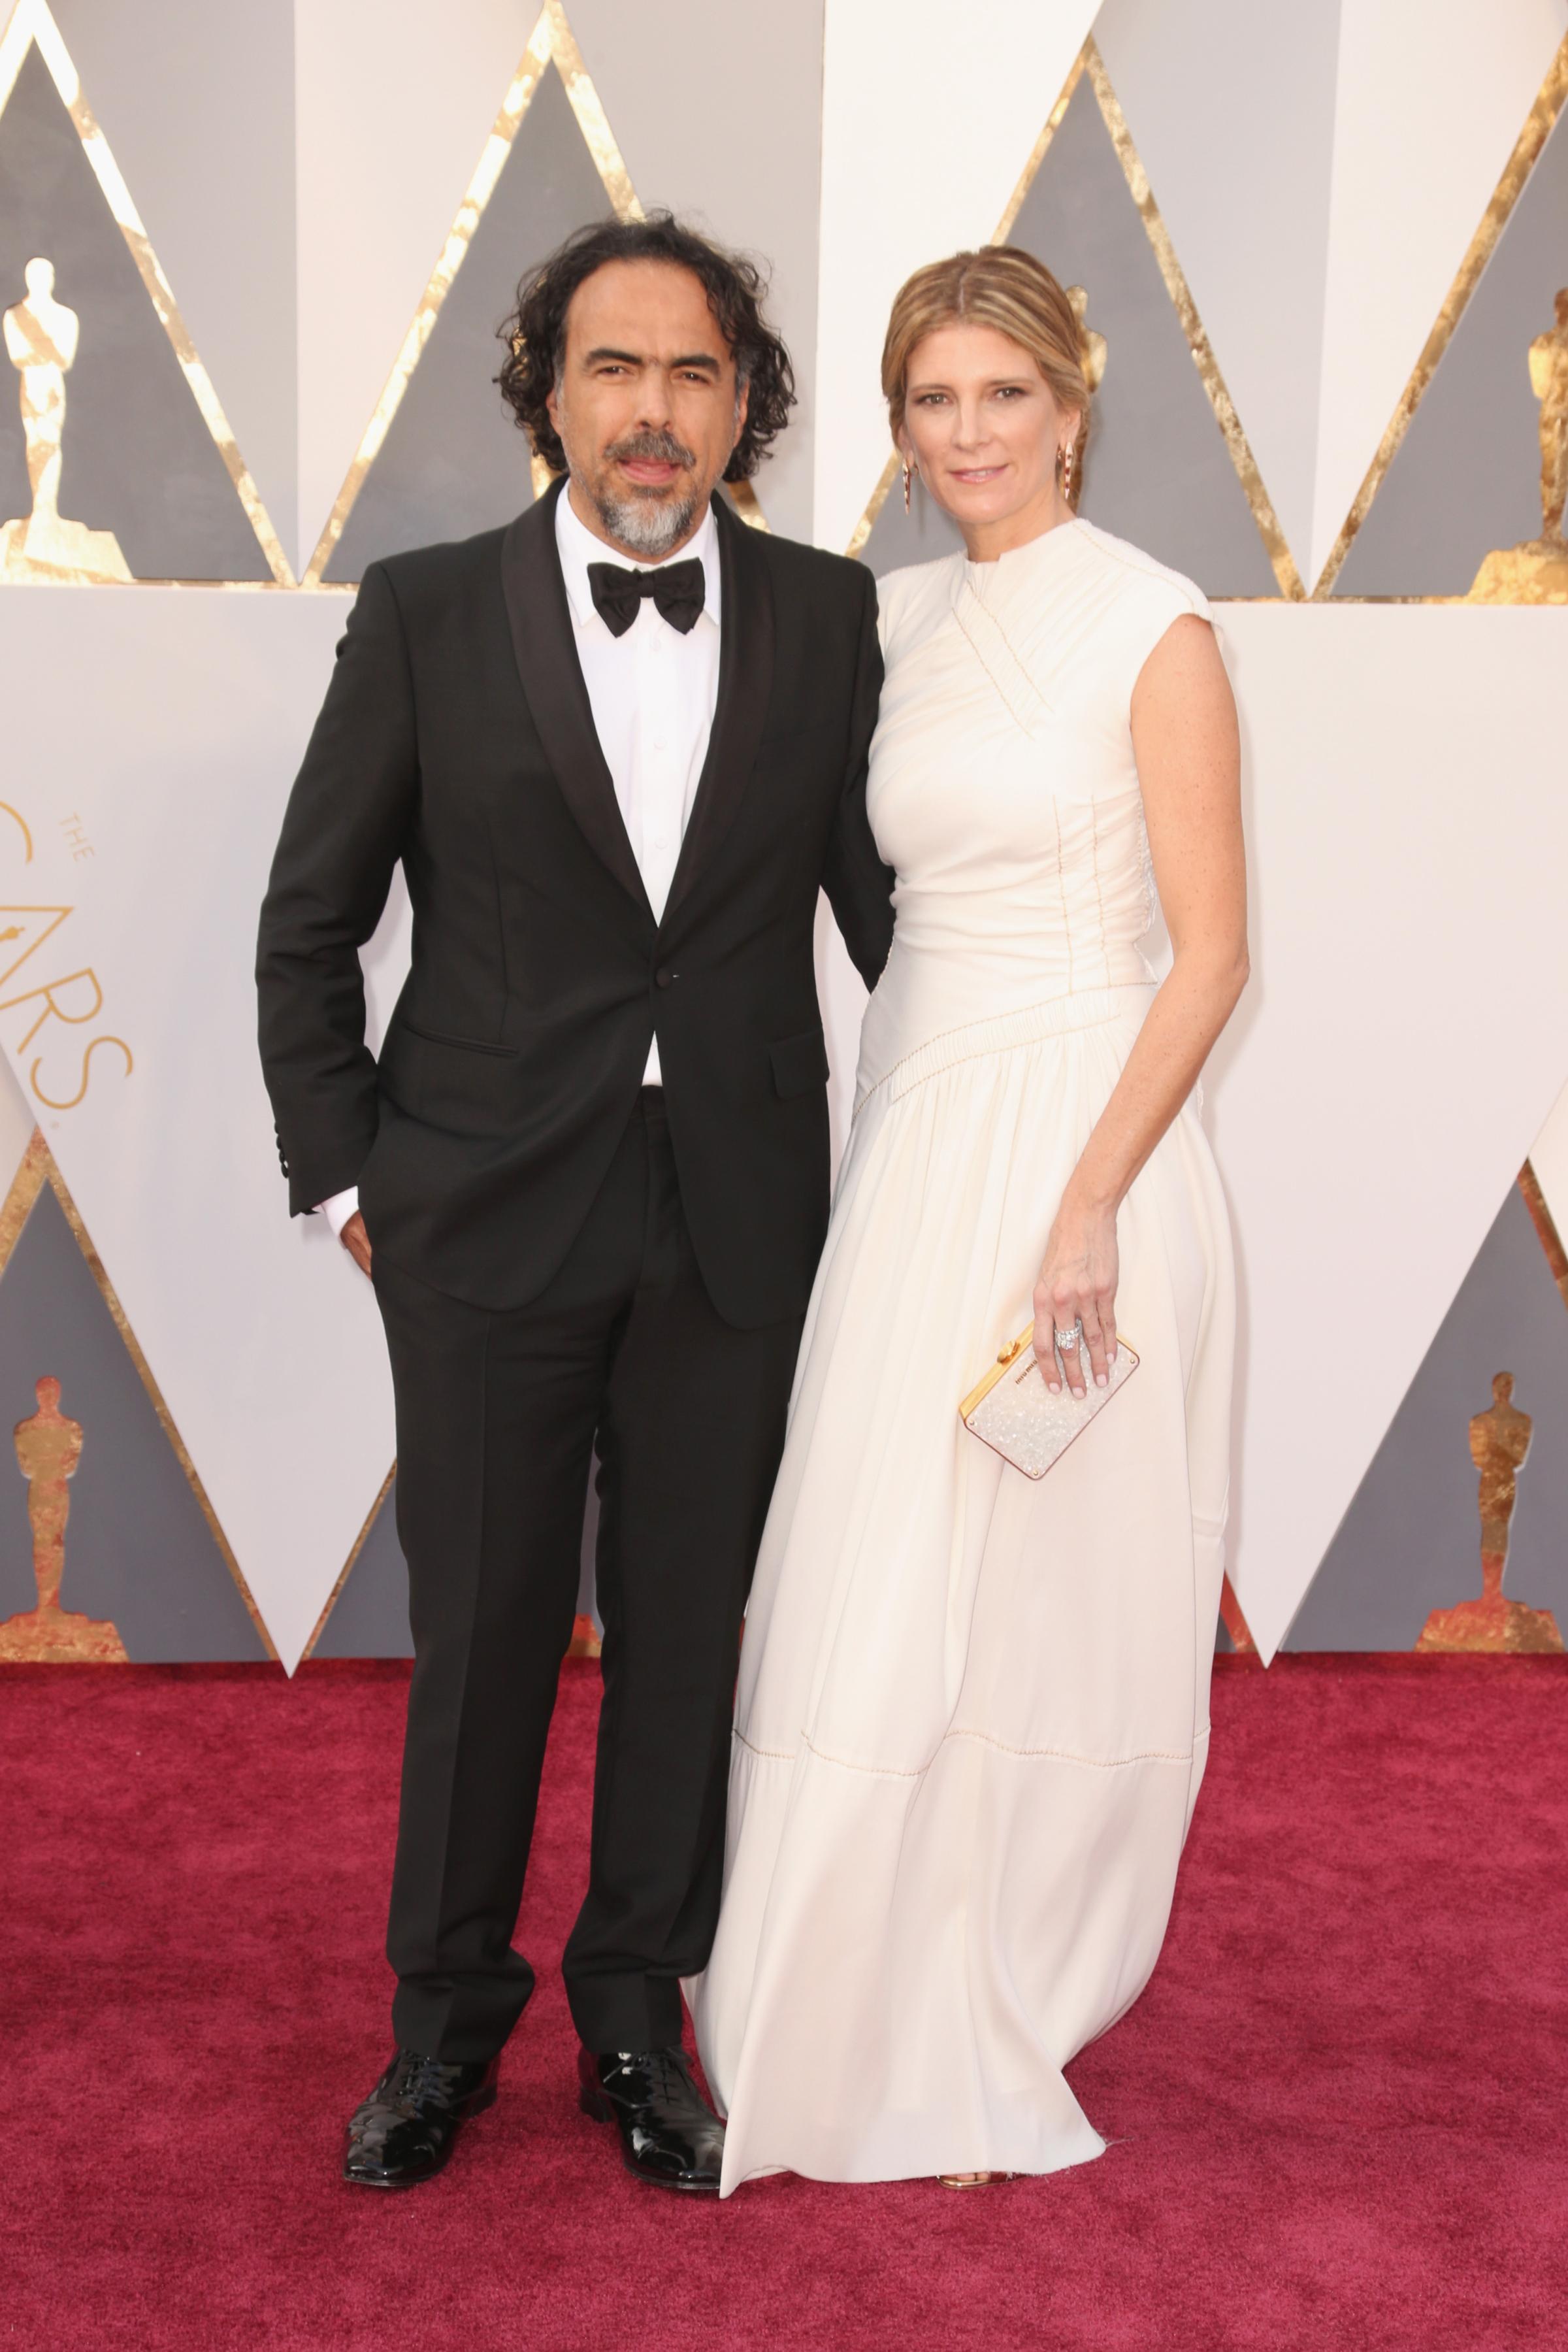 Alejandro Inarritu and Maria Eladia Hagerman attend the 88th Annual Academy Awards on Feb. 28, 2016 in Hollywood, Calif.